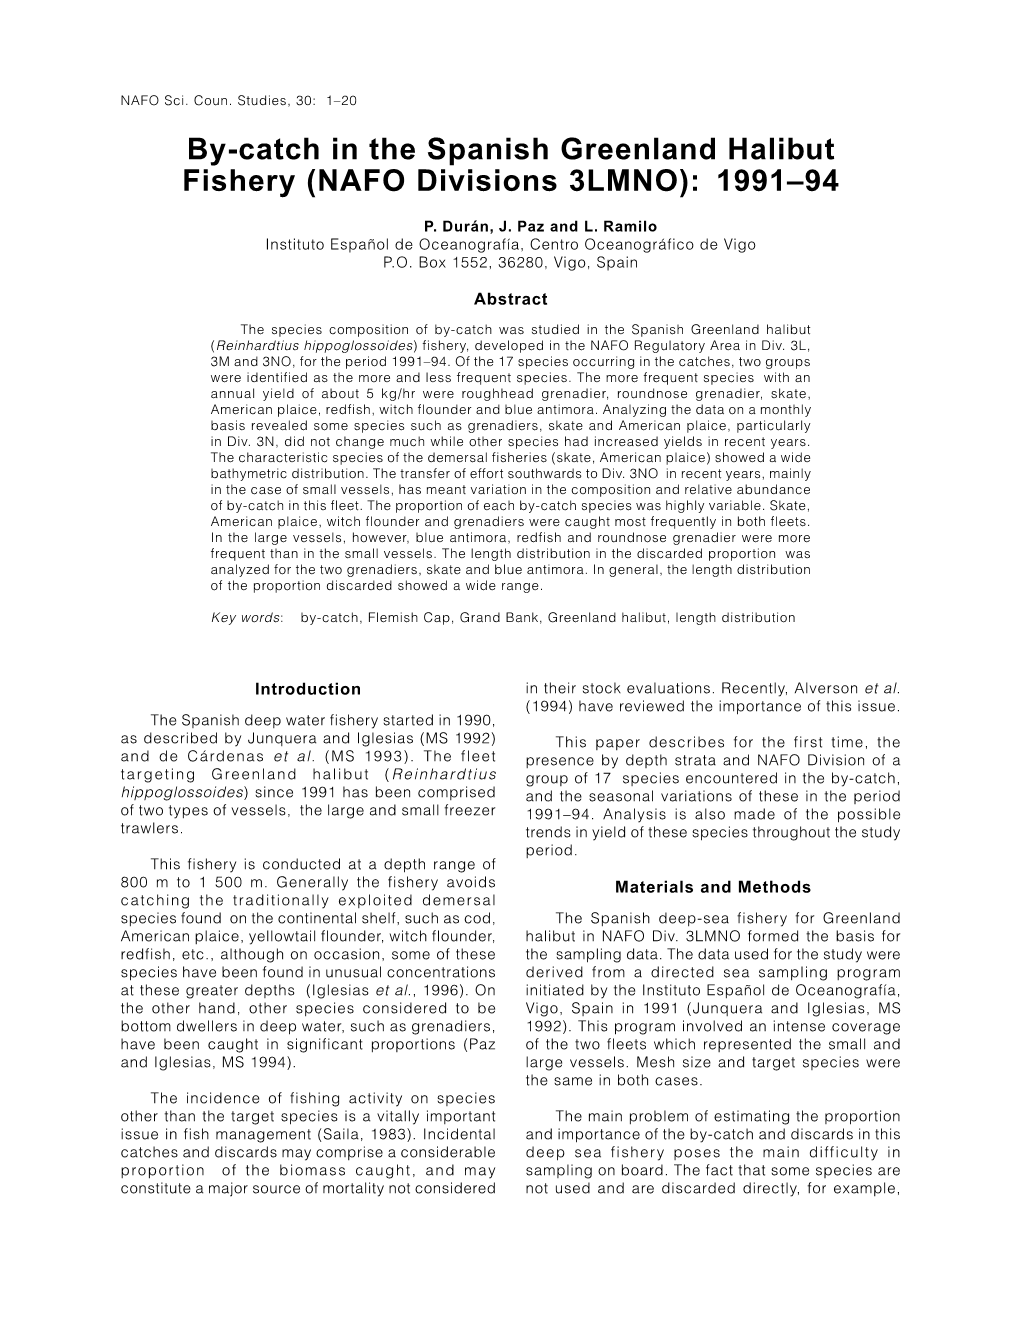 By-Catch in the Spanish Greenland Halibut Fishery (NAFO Divisions 3LMNO): 1991–94